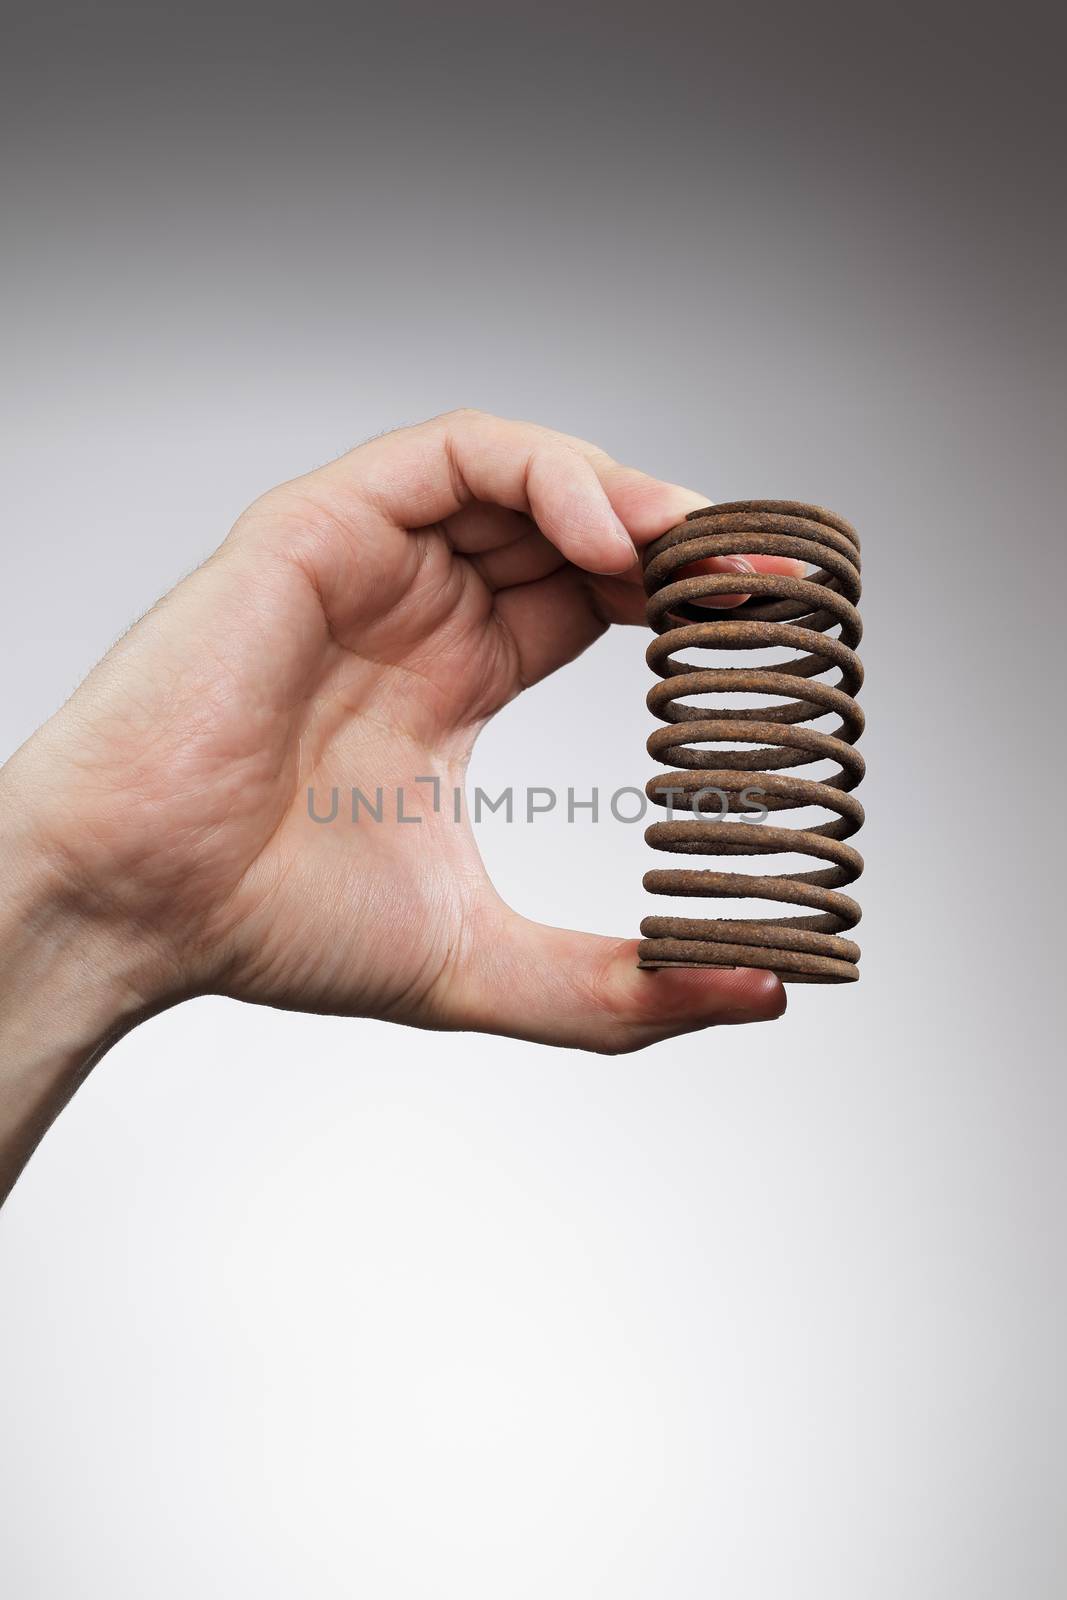 Man holding an old rusty spring is his hand.